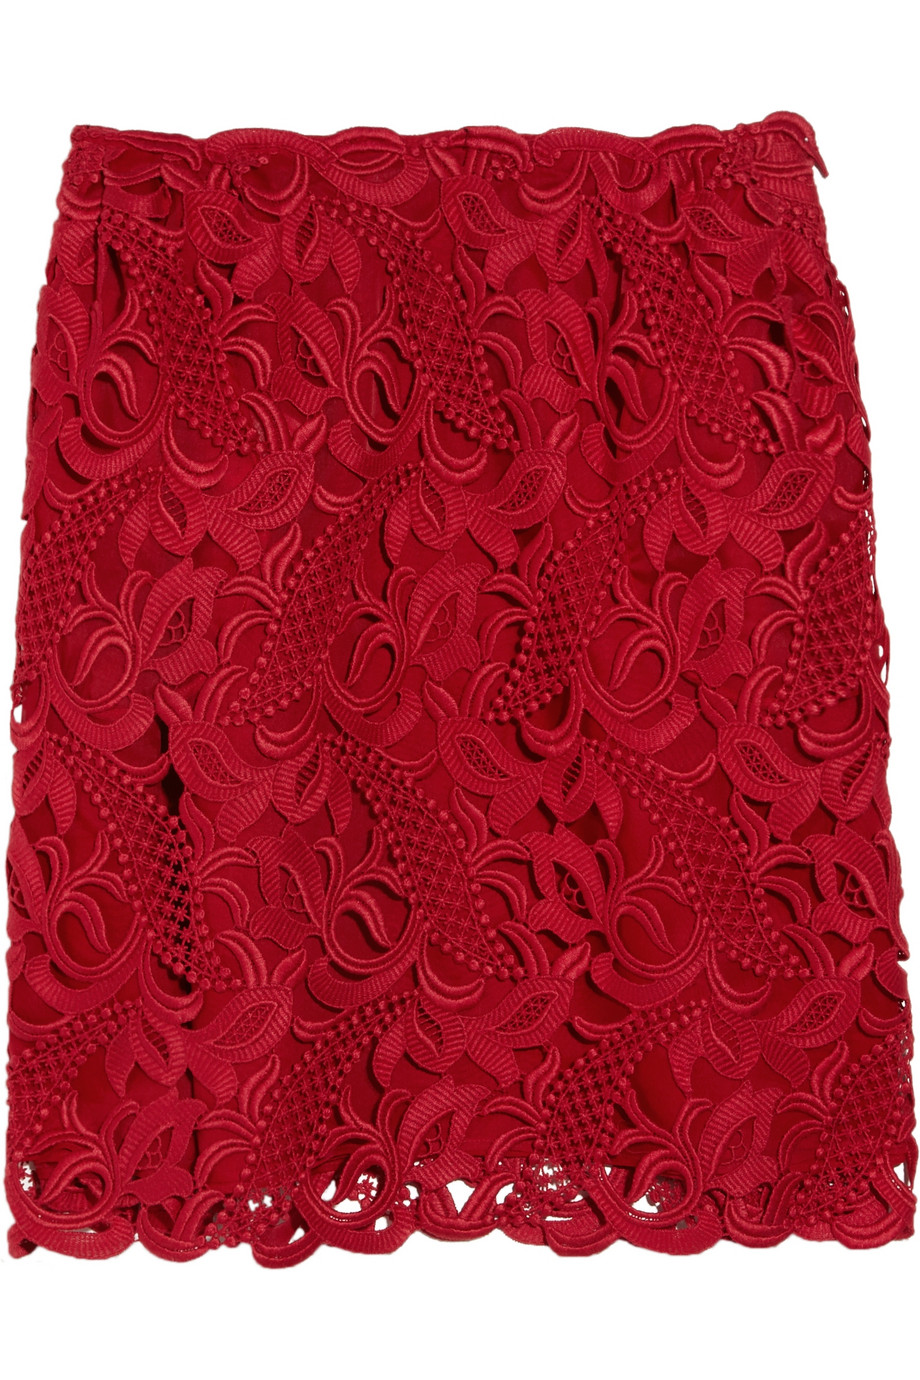 Lyst - Valentino Macramé and Silk-organza Skirt in Red